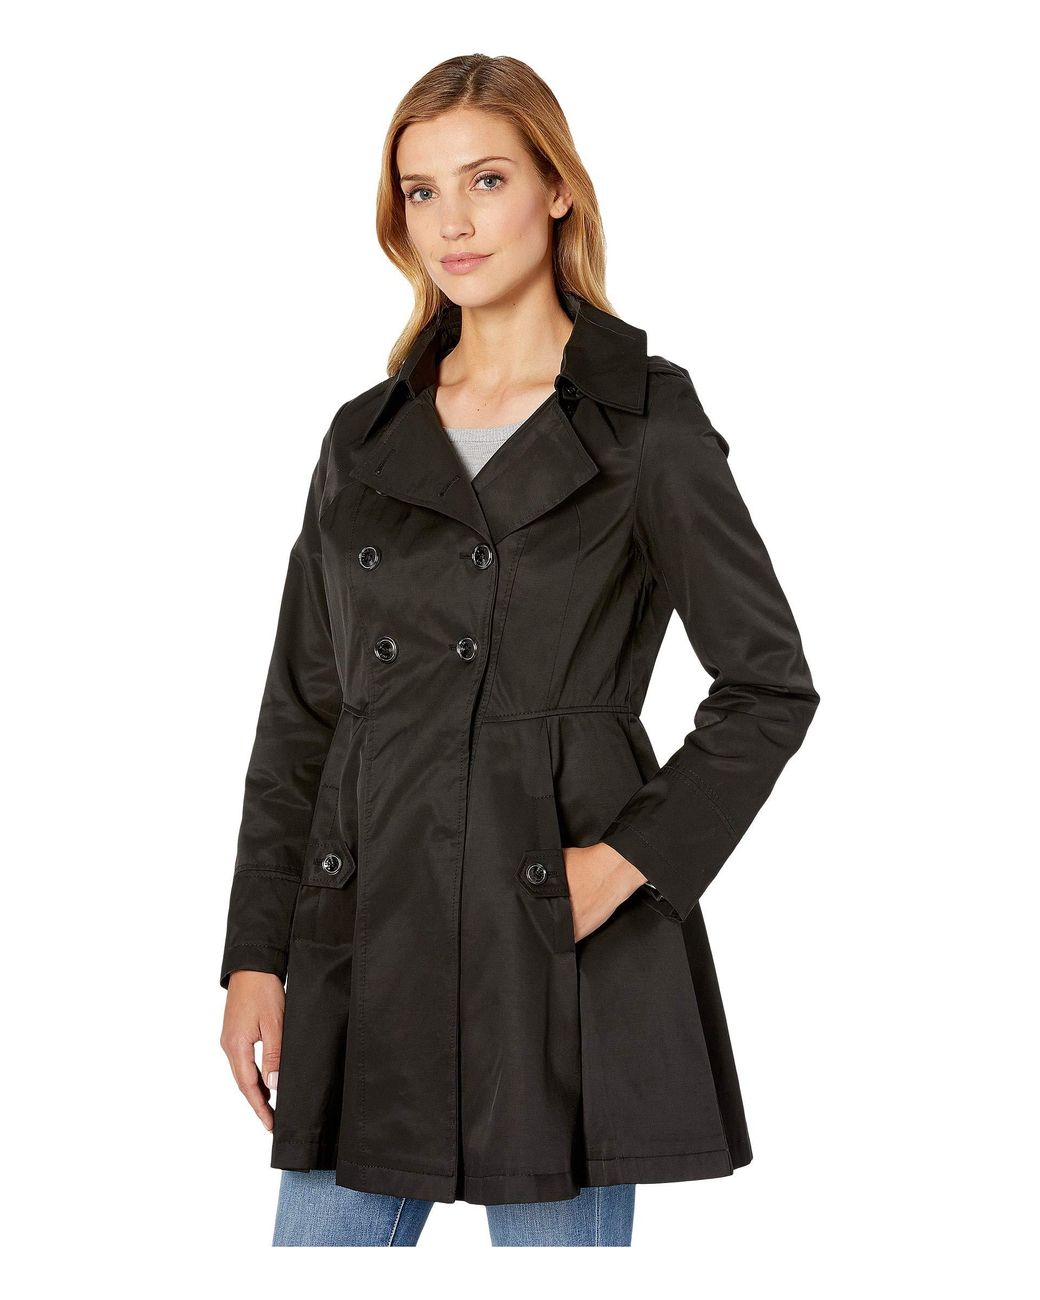 Via Spiga Womens Plus-Size Double Breasted Hooded Fit and Flare Lightweight Trench Coat